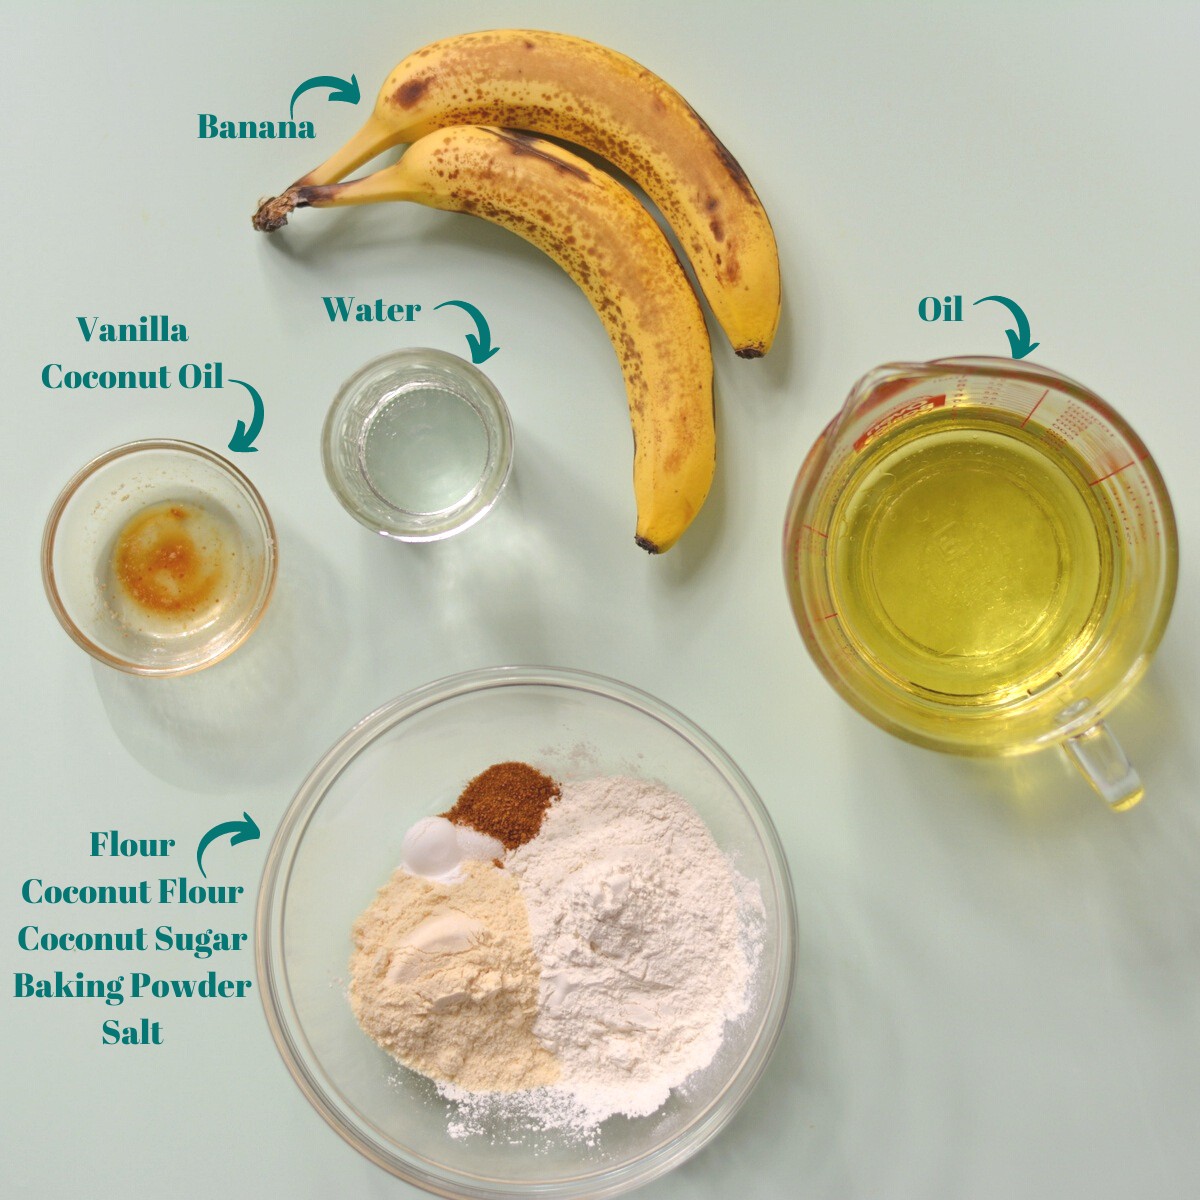 An overhead view of bananas, oil, and flour.